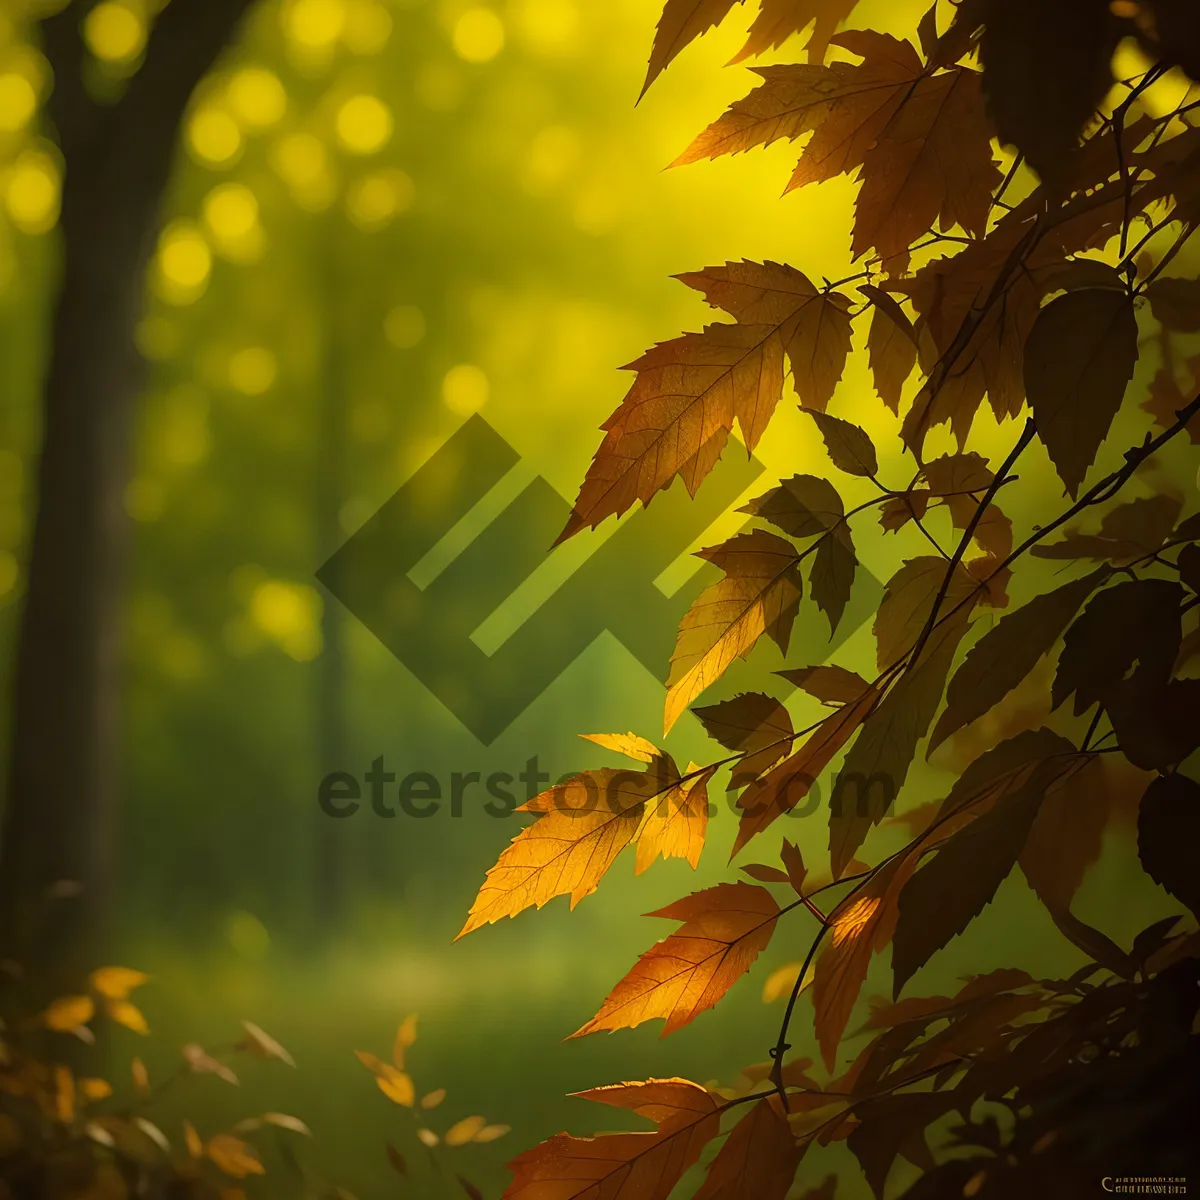 Picture of Golden Autumn Leaves in Sunlit Forest